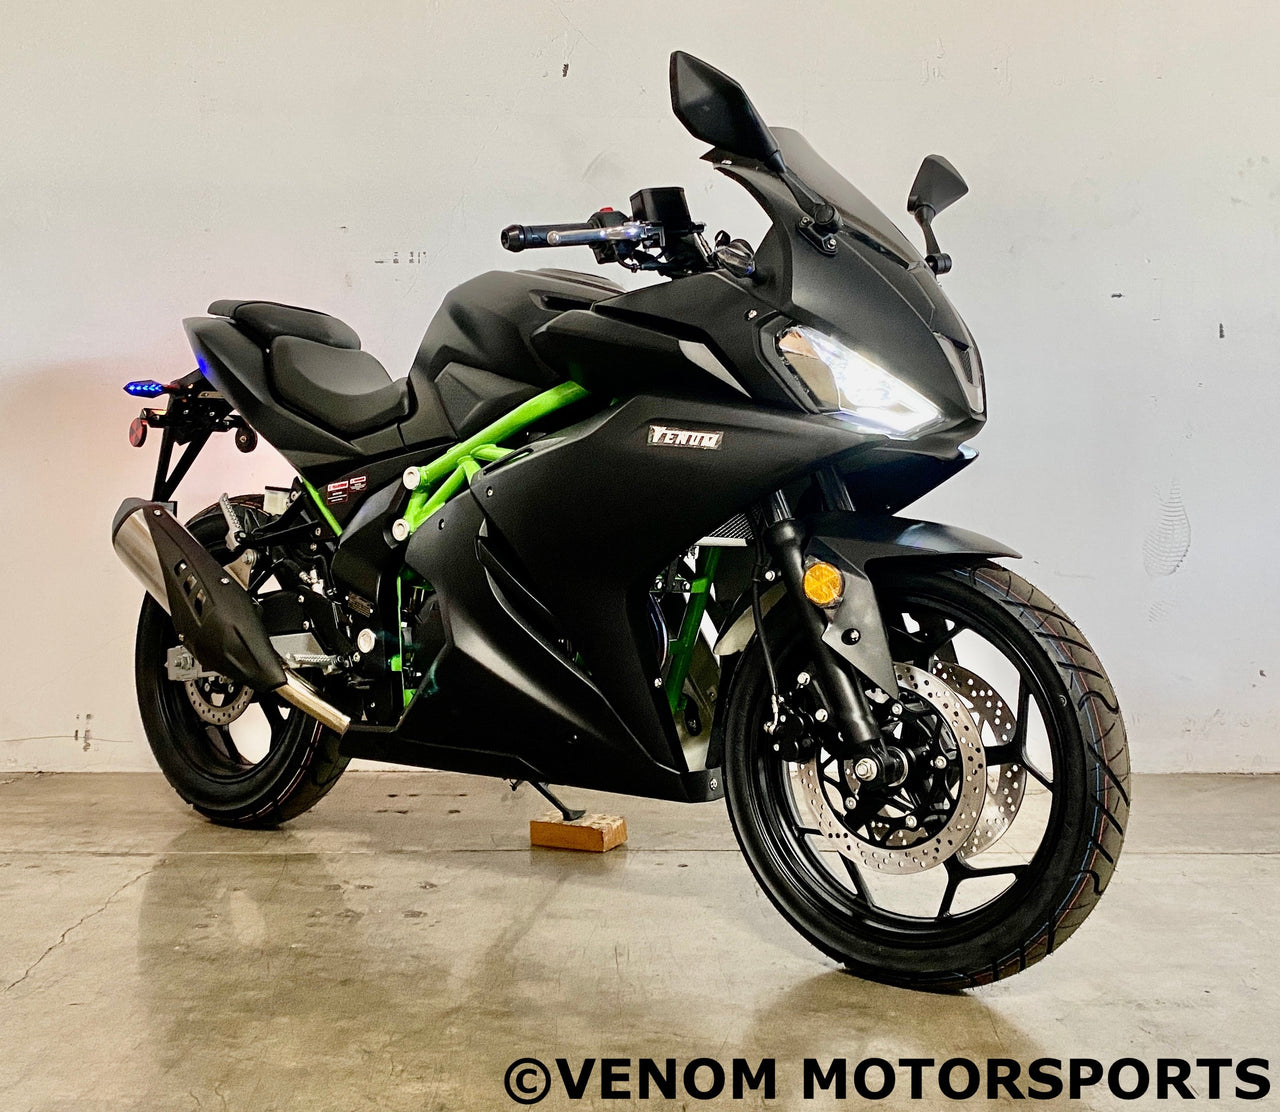 Venom x22R MAX | 250cc Motorcycle | Fuel-Injected | Street Legal